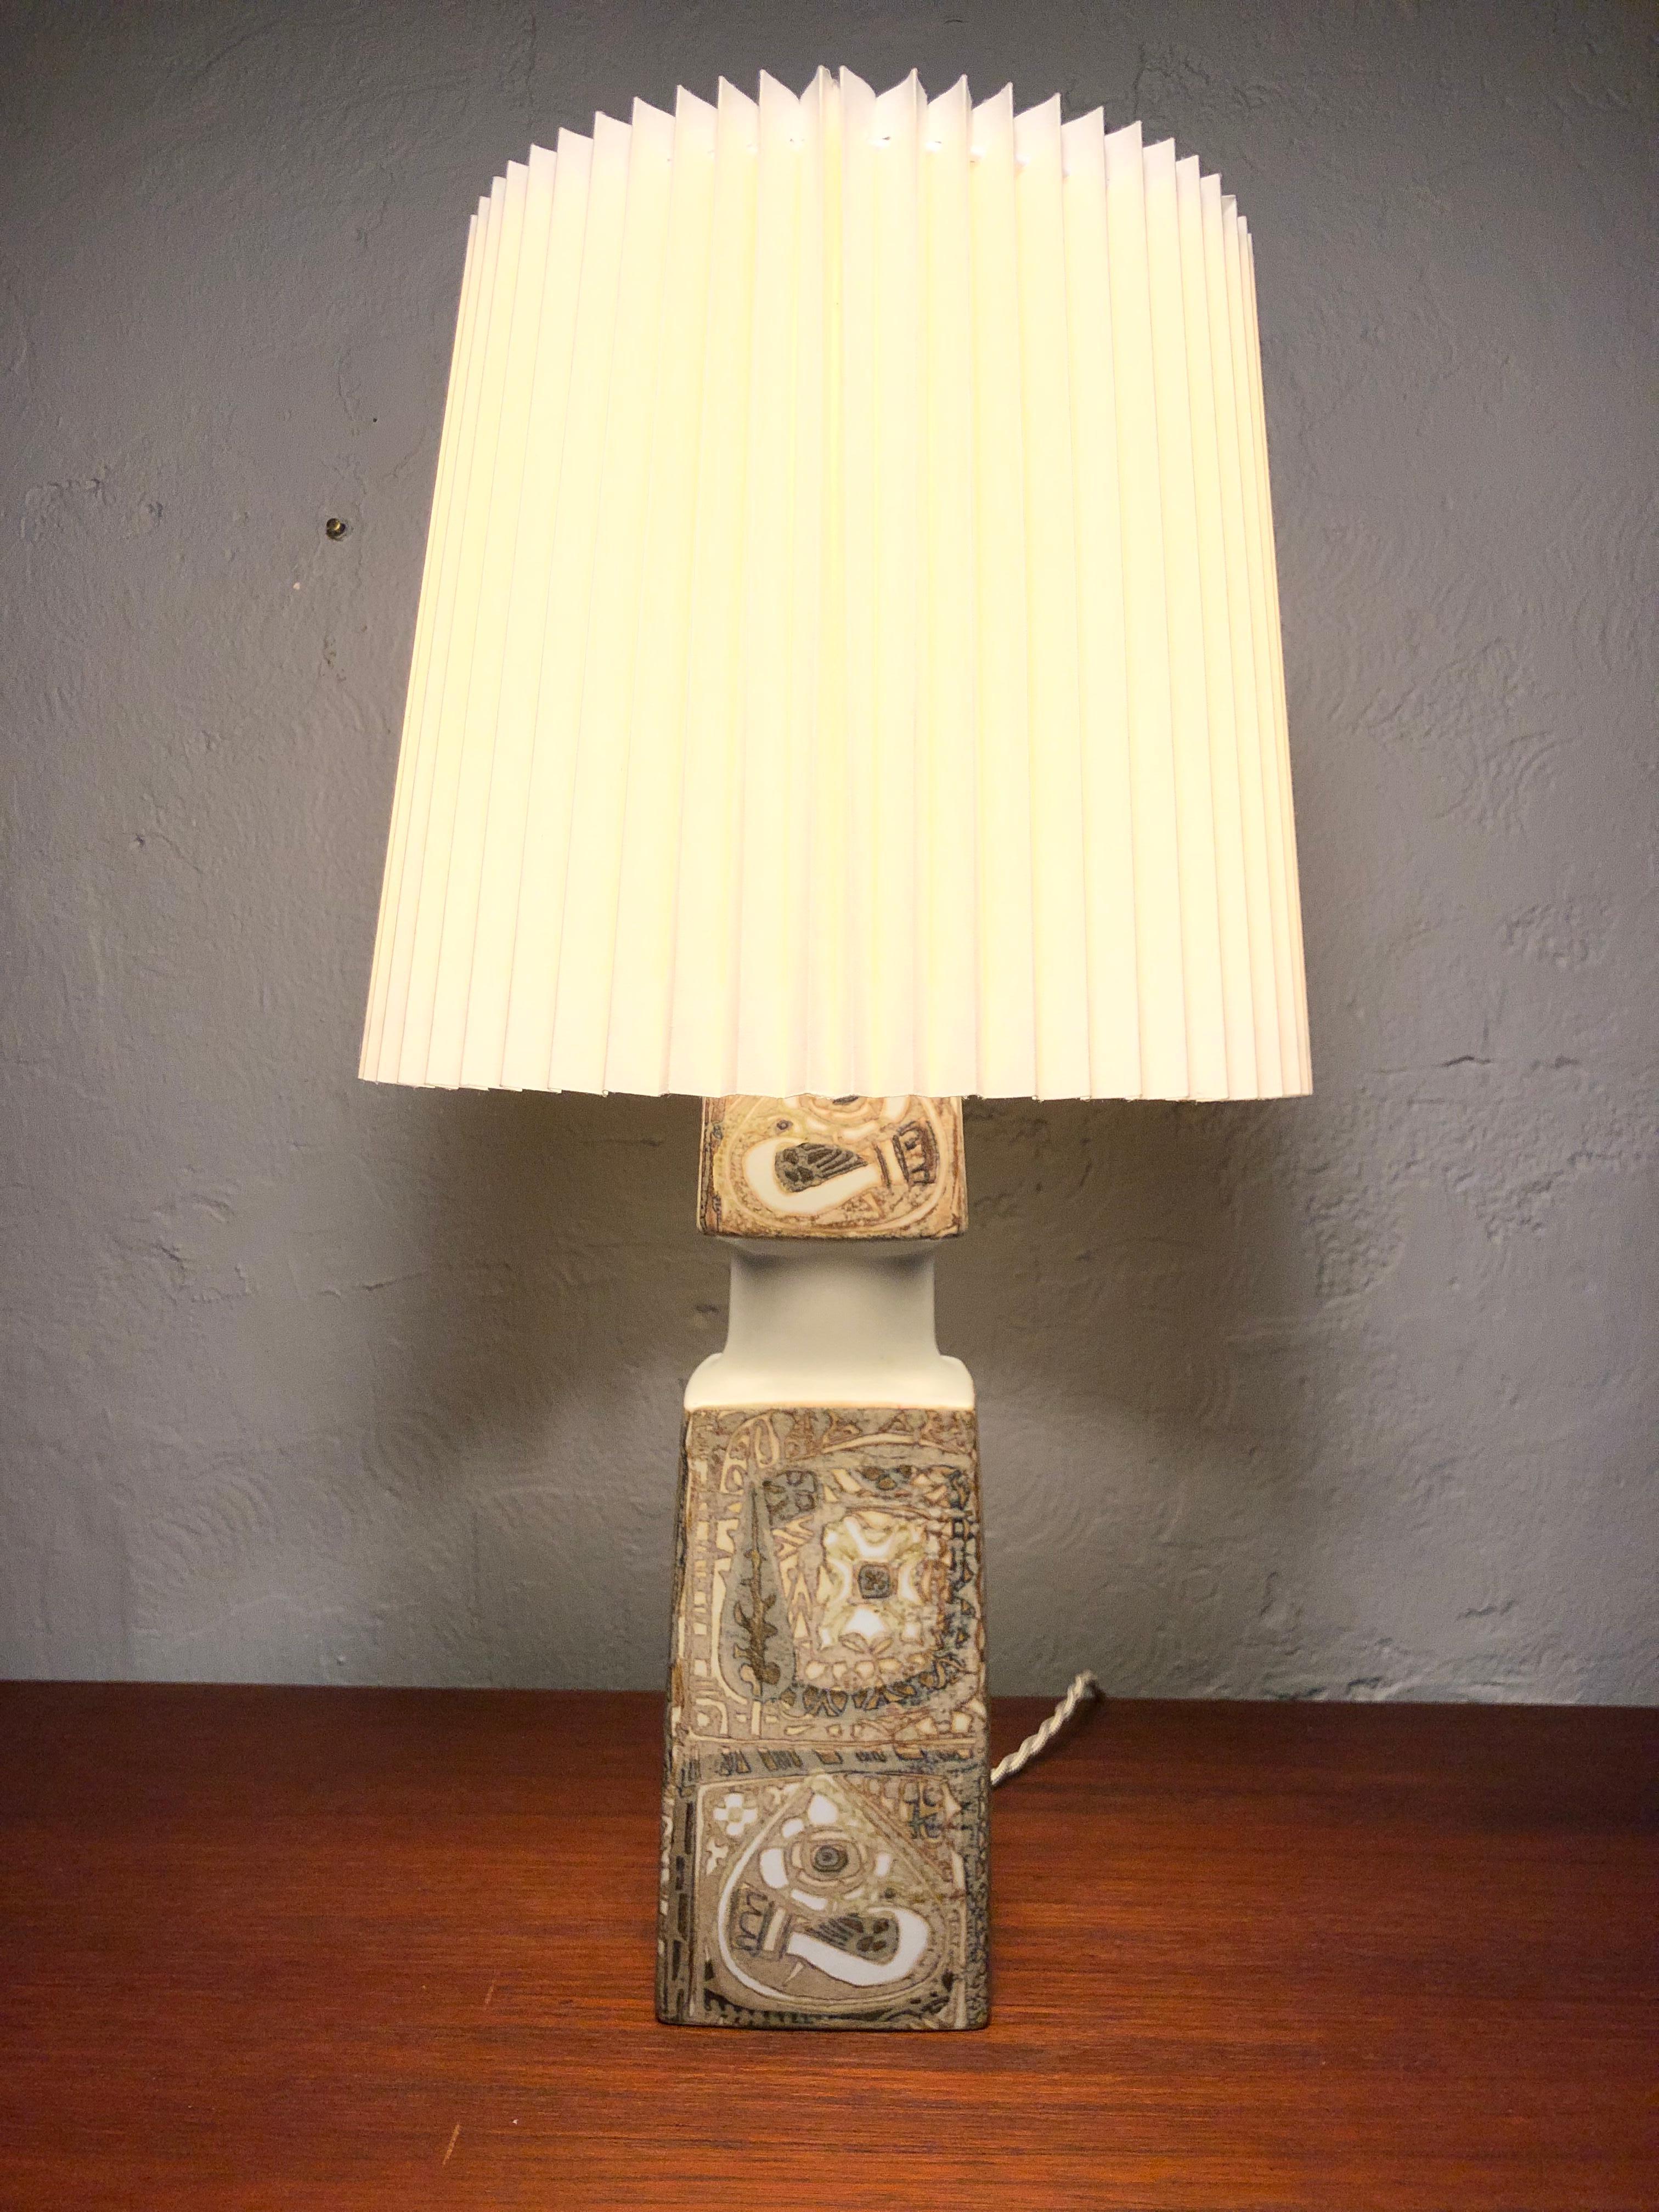 A Classic Mid Century Ceramic Table Lamp By Nils Thorssen For Fog And Mørup  For Sale 2